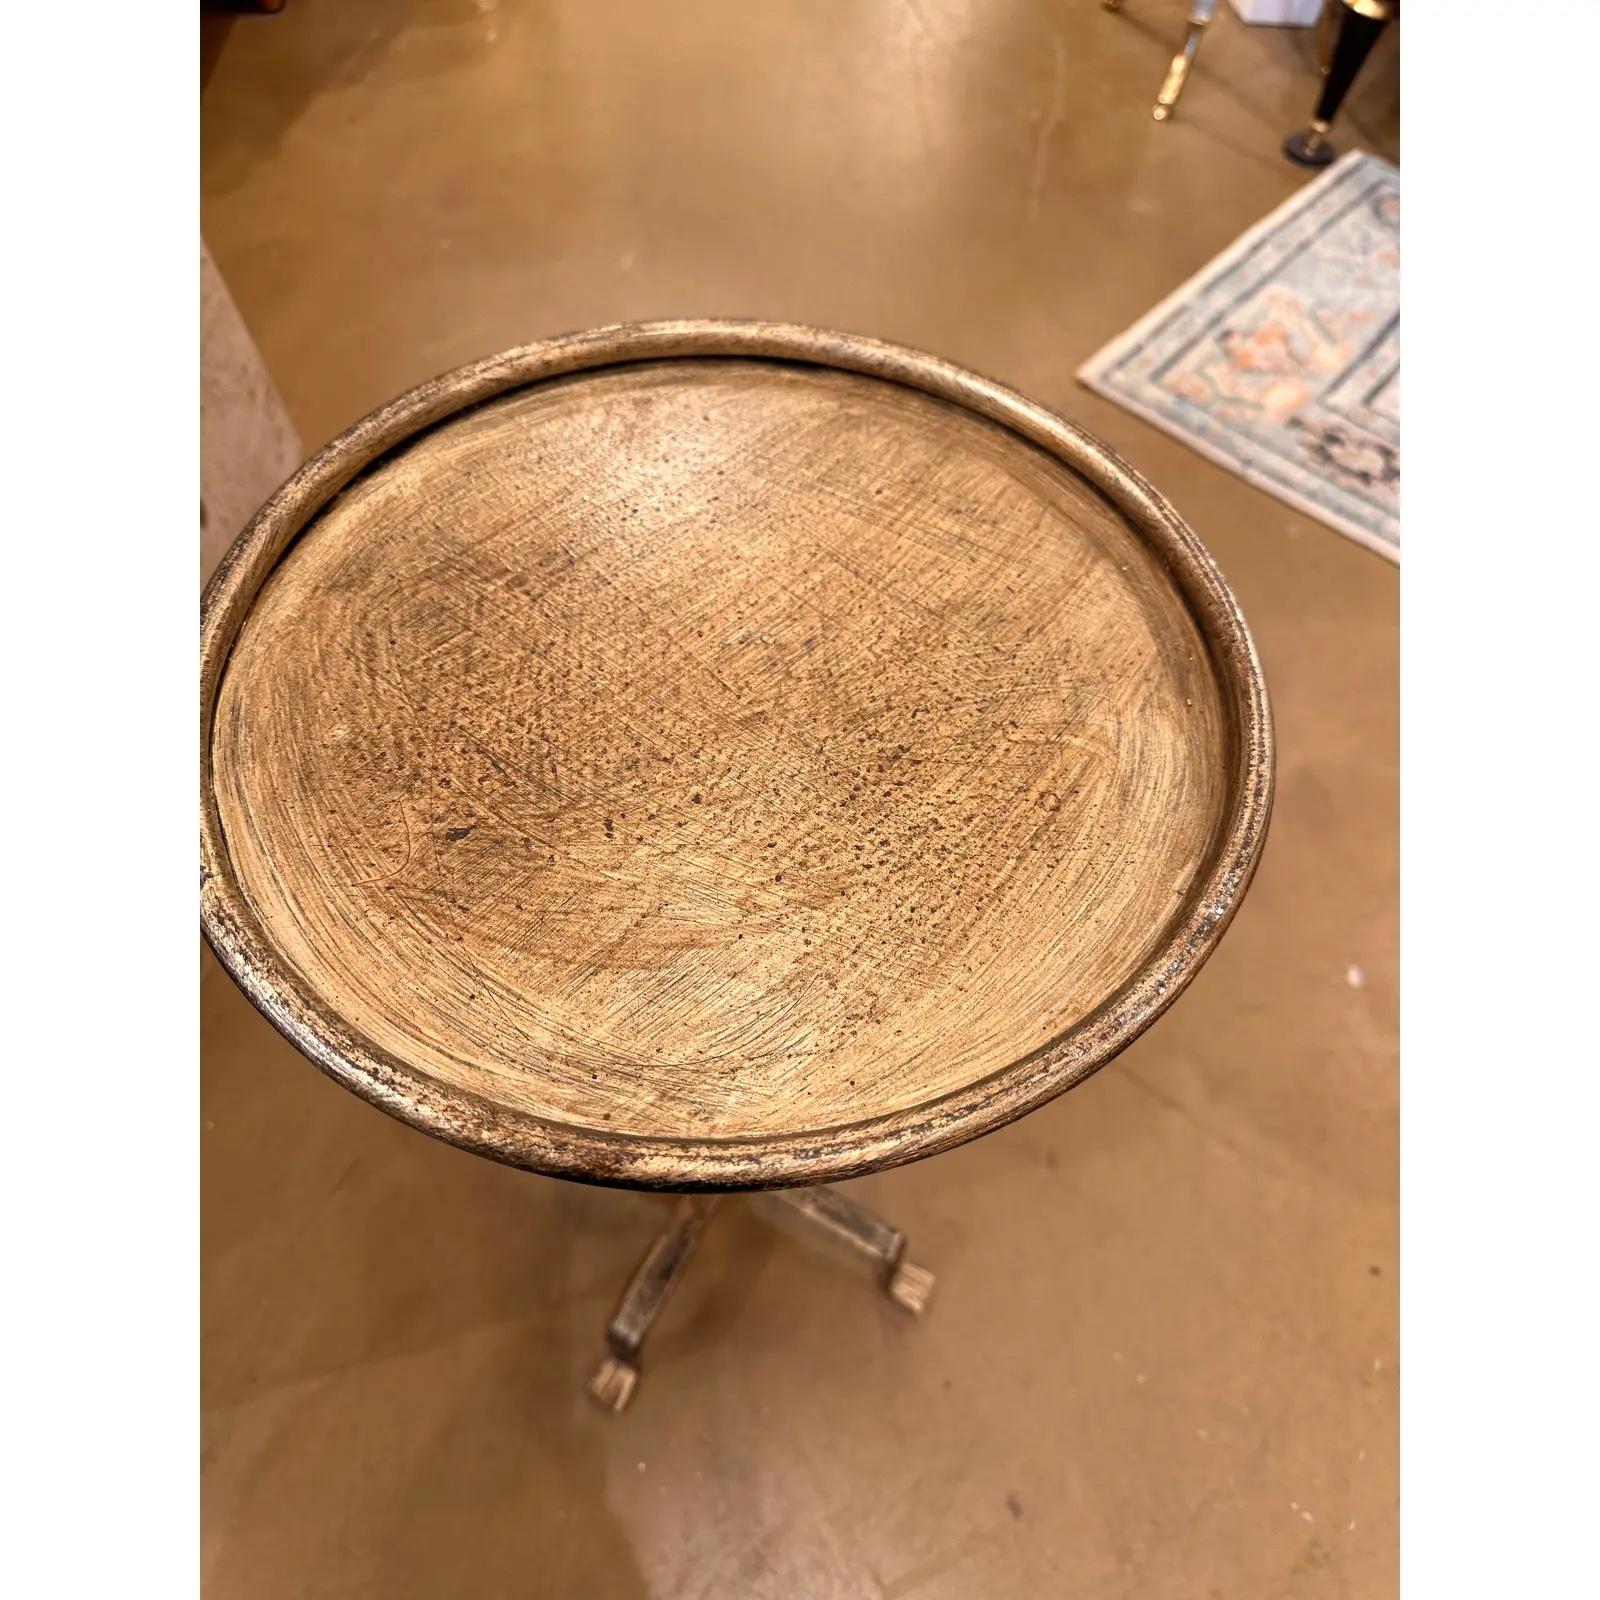 This is wonderful little Spanish made wrought iron drink table with an antiqued gold finish.Contemporary yet antique inspired style for any decor aesthetic. We have 5 of these listed all have their own unique design, giving them such wonderful